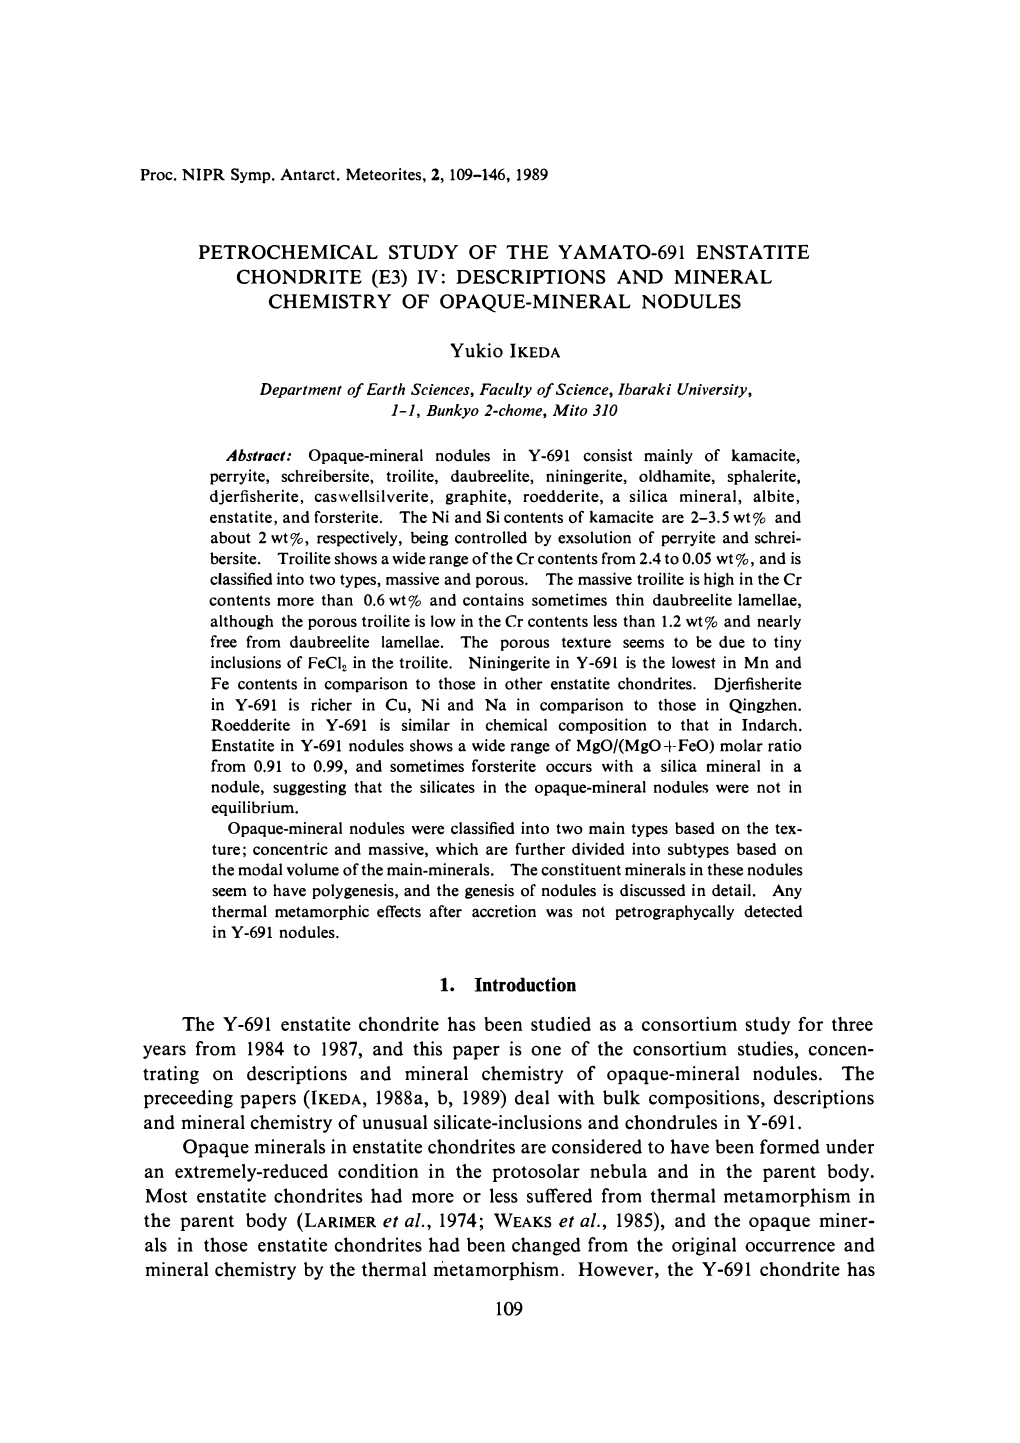 Petrochemical Study of the Yamat0-691 Enstatite Chondrite (E3) Iv: Descriptions and Mineral Chemistry of Opaque-Mineral Nodules